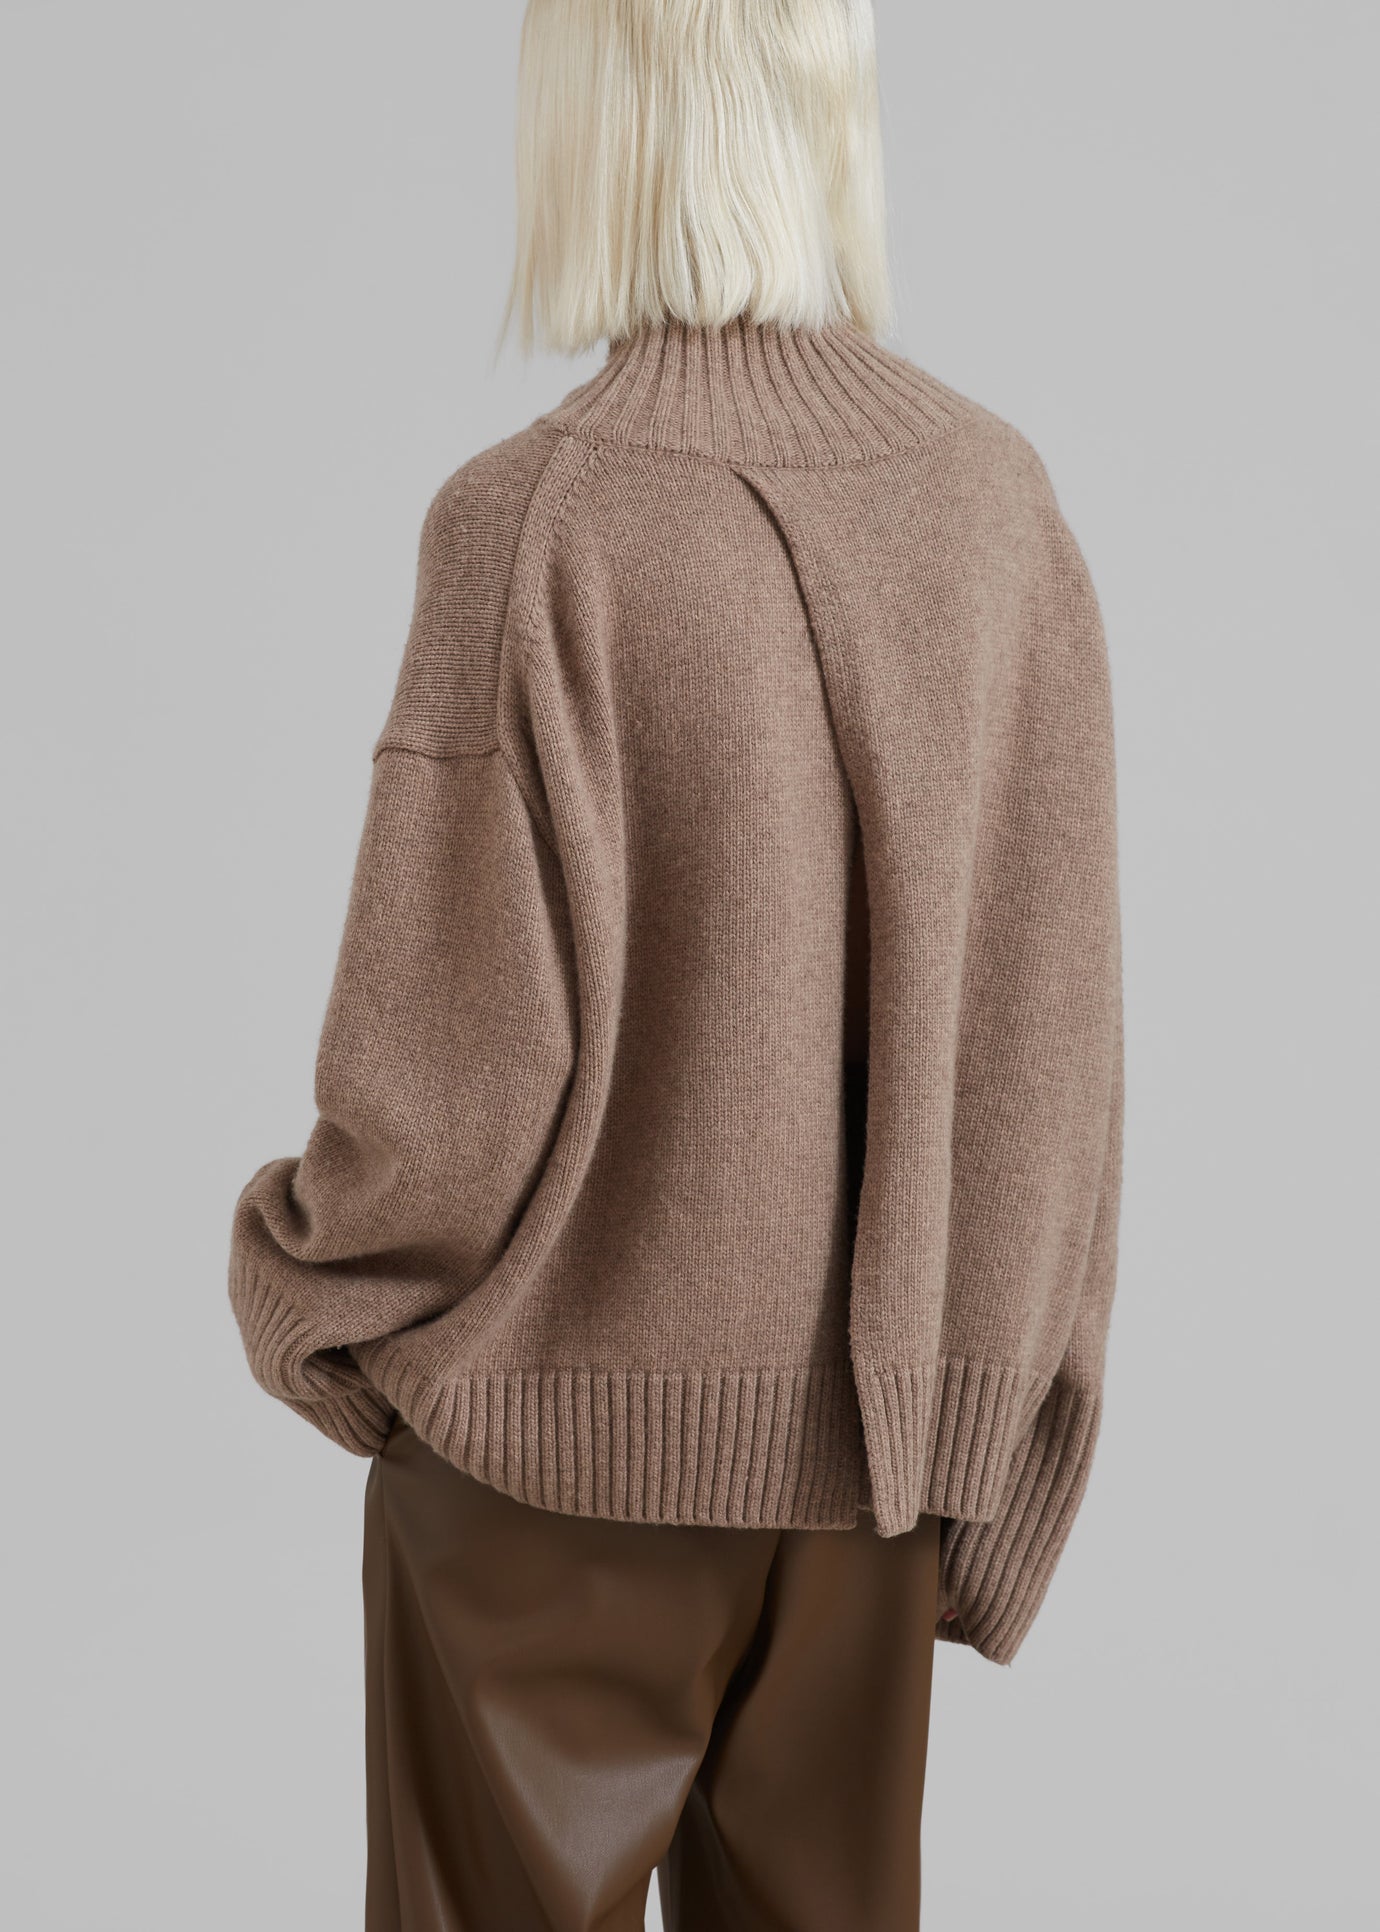 Liana Open Back Sweater - Taupe - 1